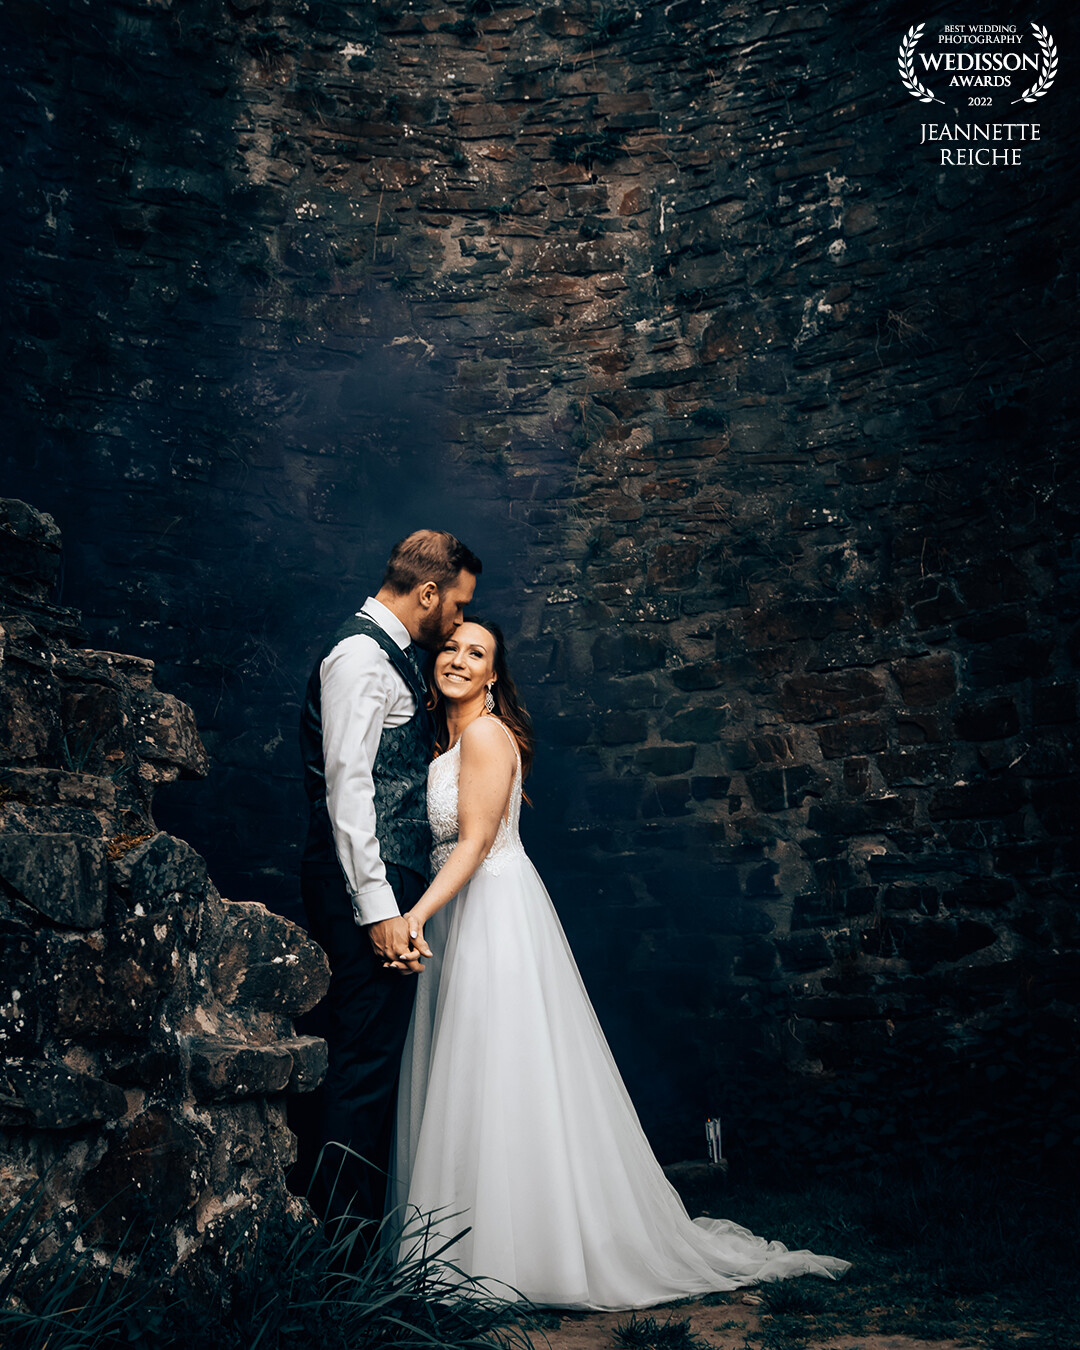 For the after-wedding shoot, I was in a castle ruin with the bridal couple. I always think it's nice when unusual locations can be found for the shoots.